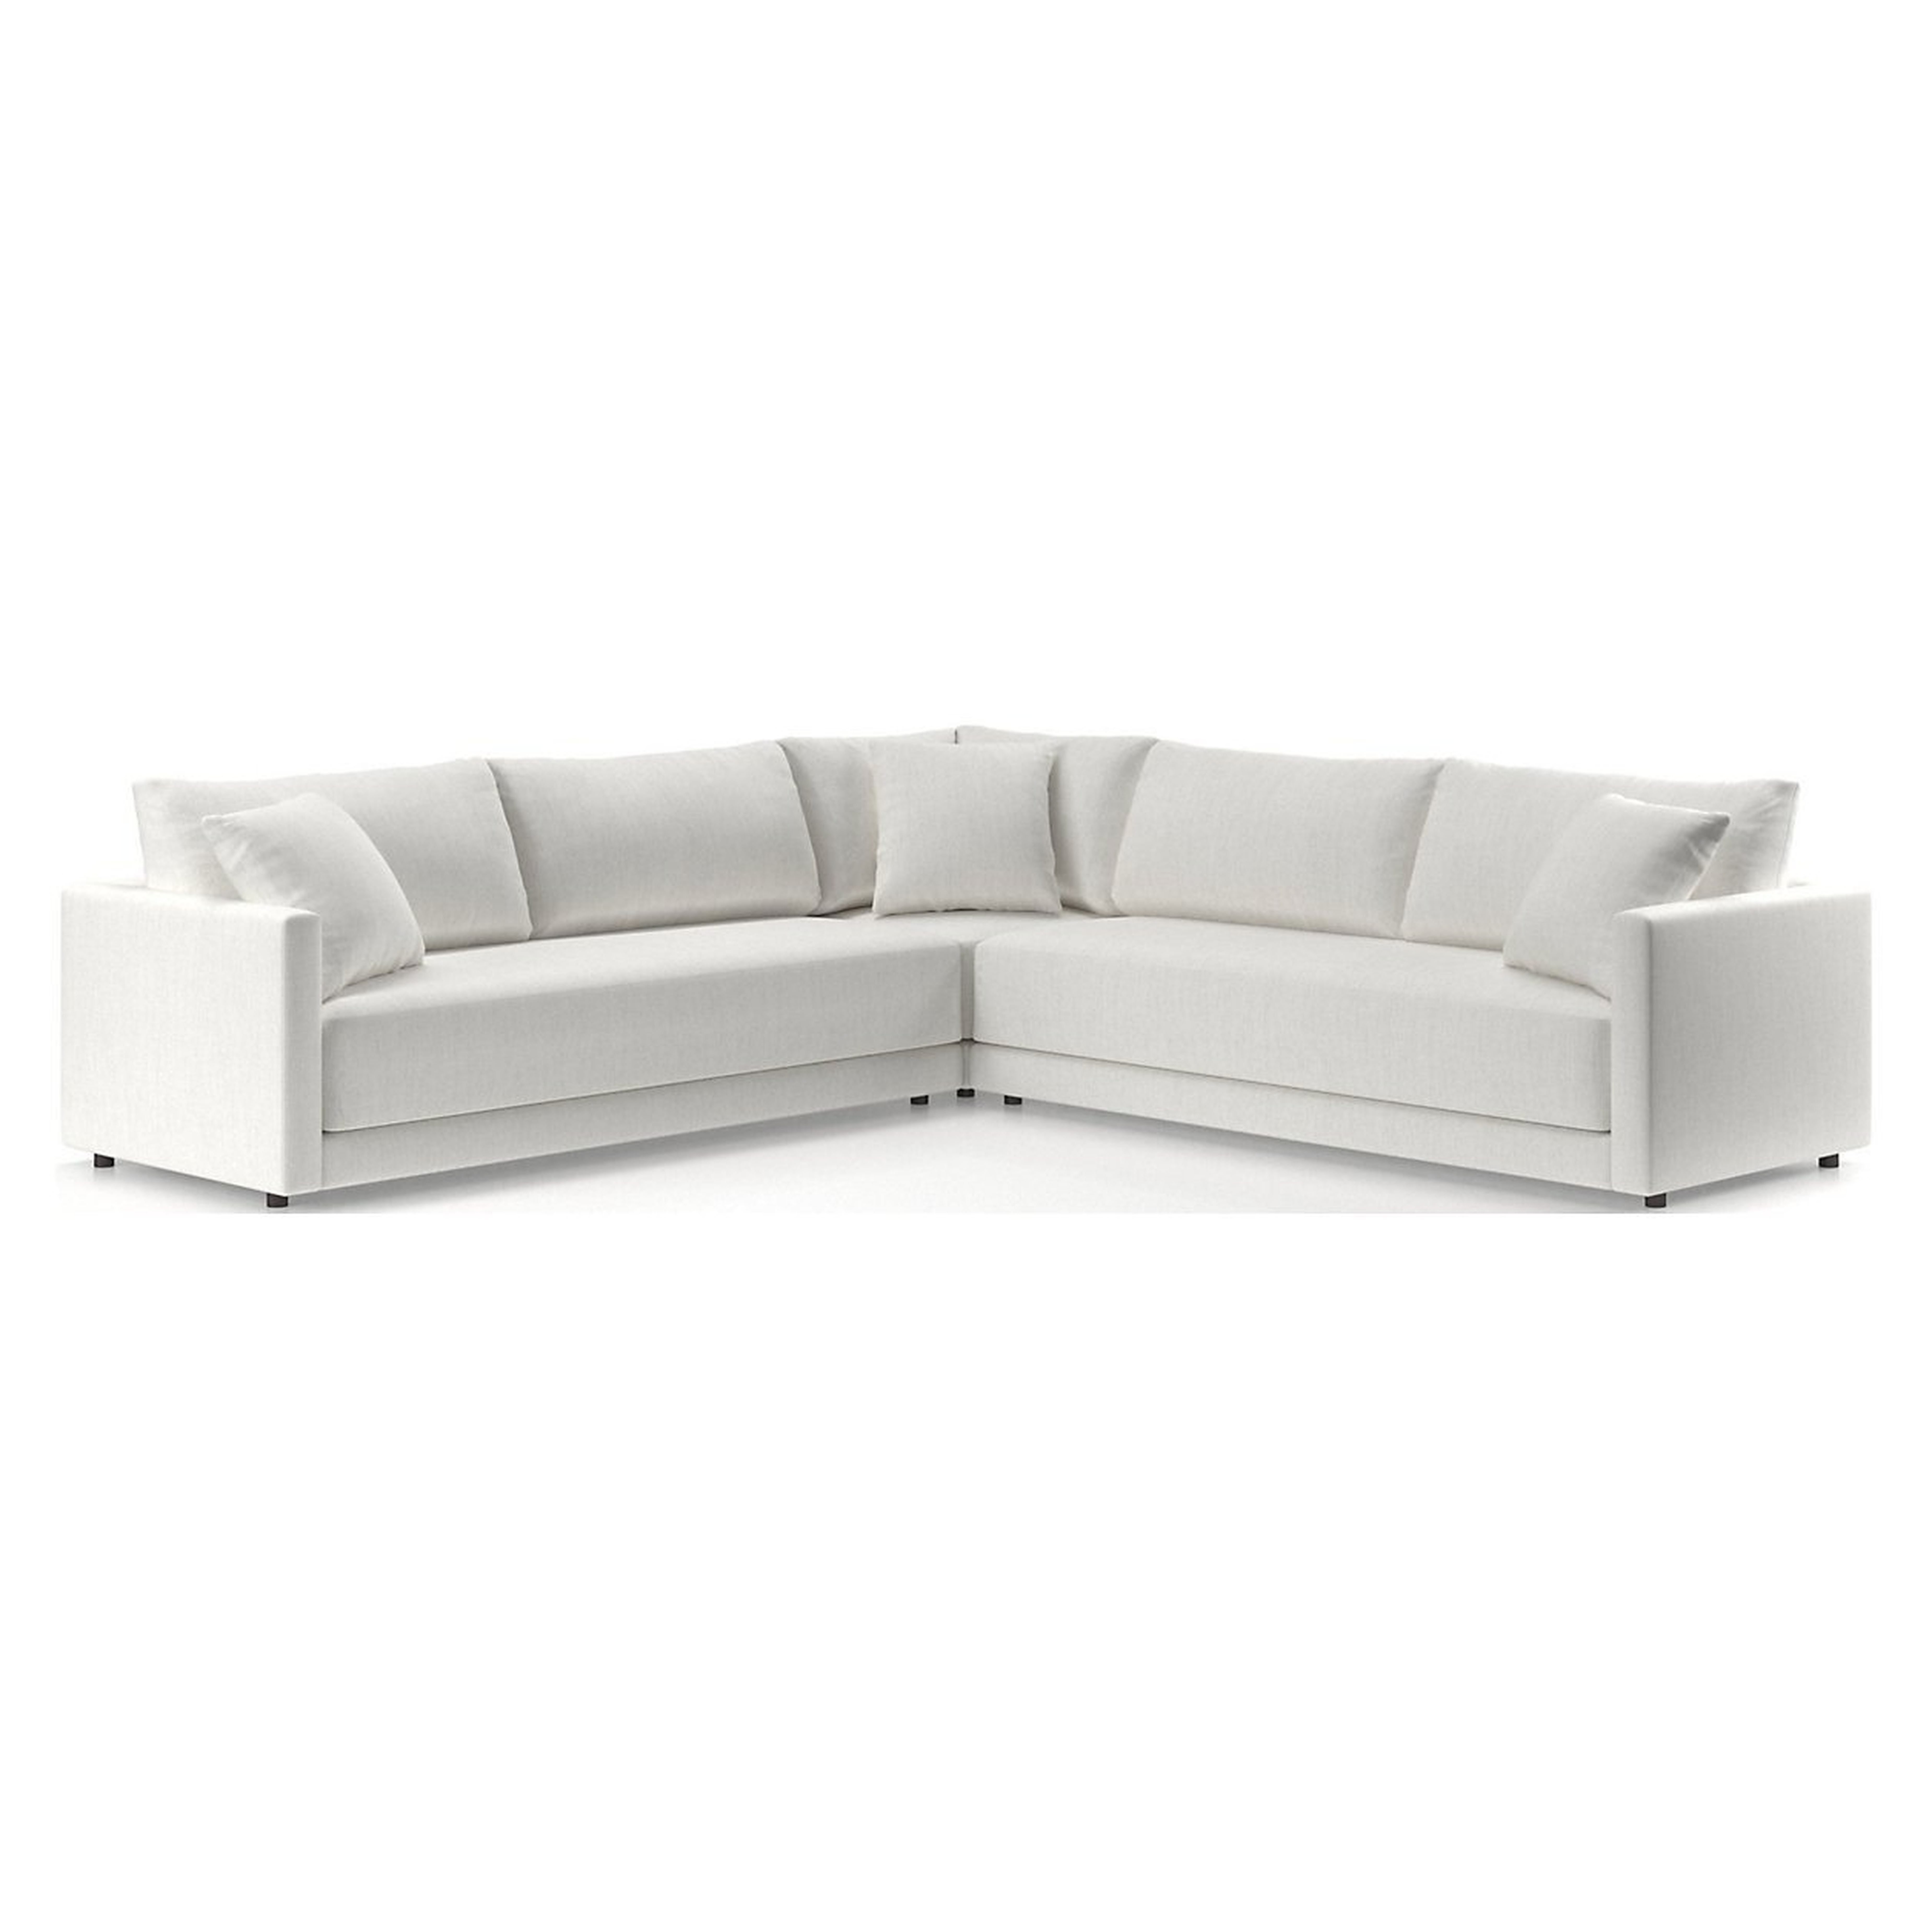 Gather 3-Piece Sectional - Crate and Barrel